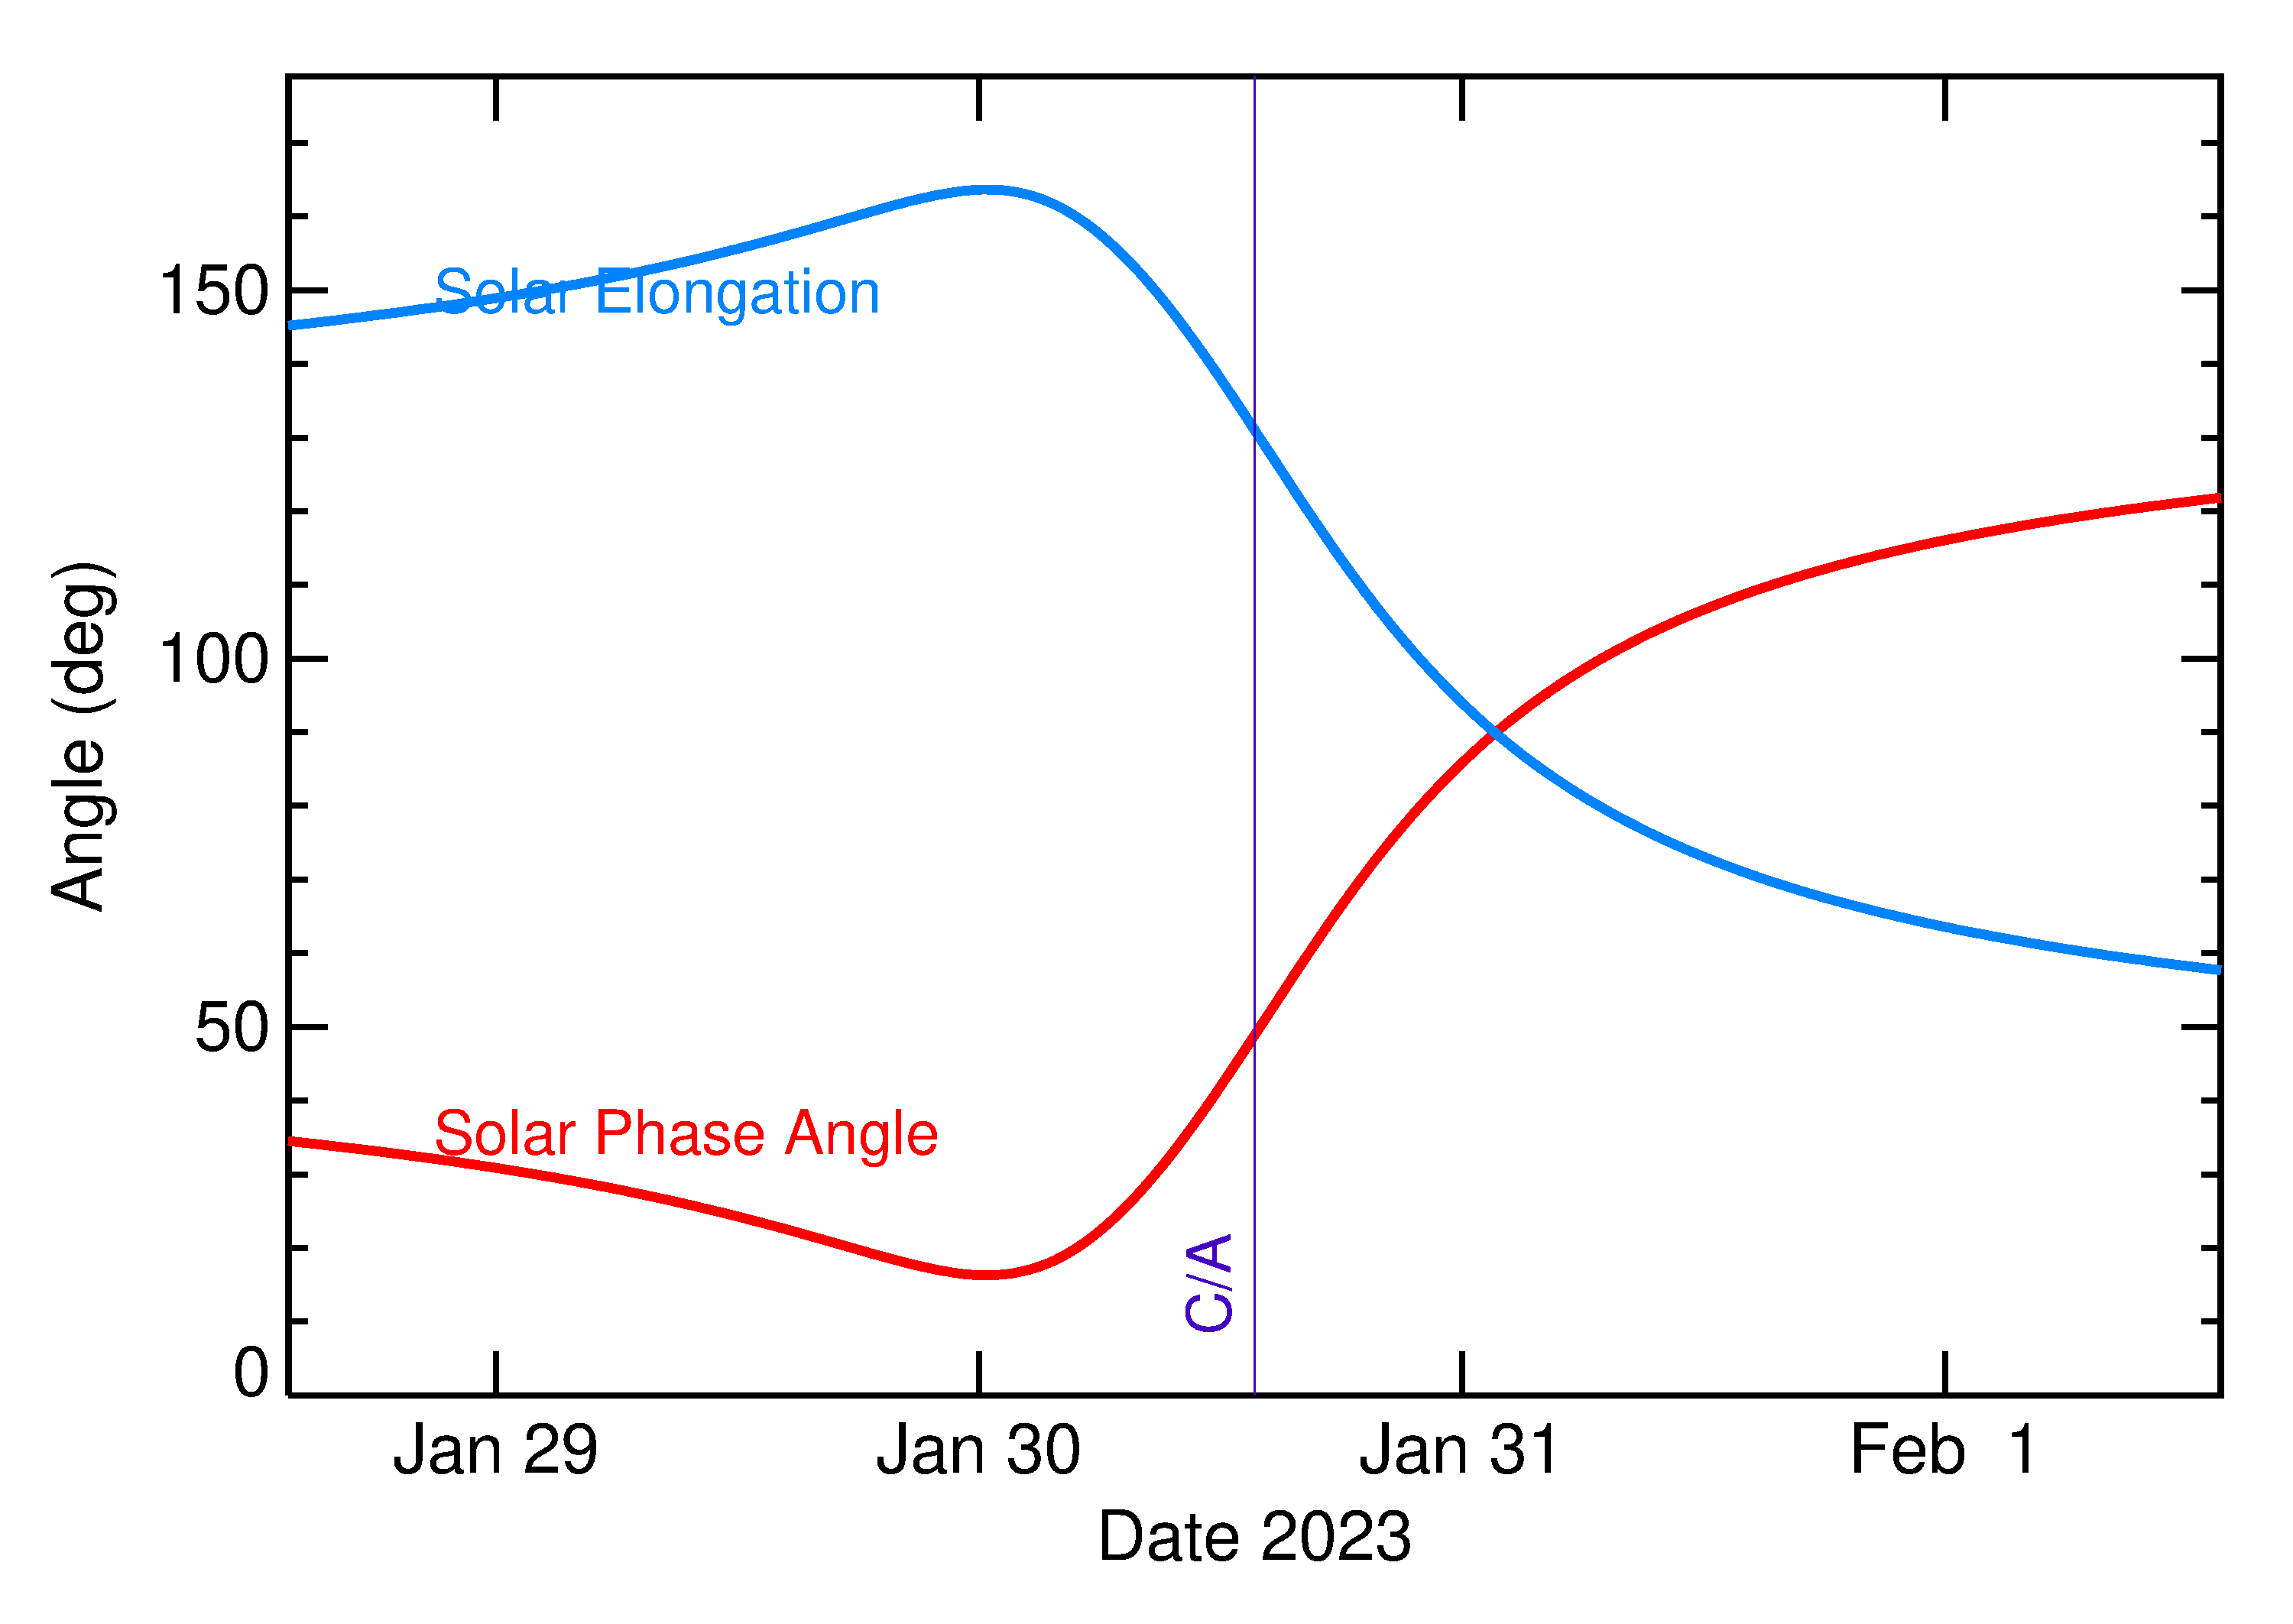 Solar Elongation and Solar Phase Angle of 2023 BJ7 in the days around closest approach